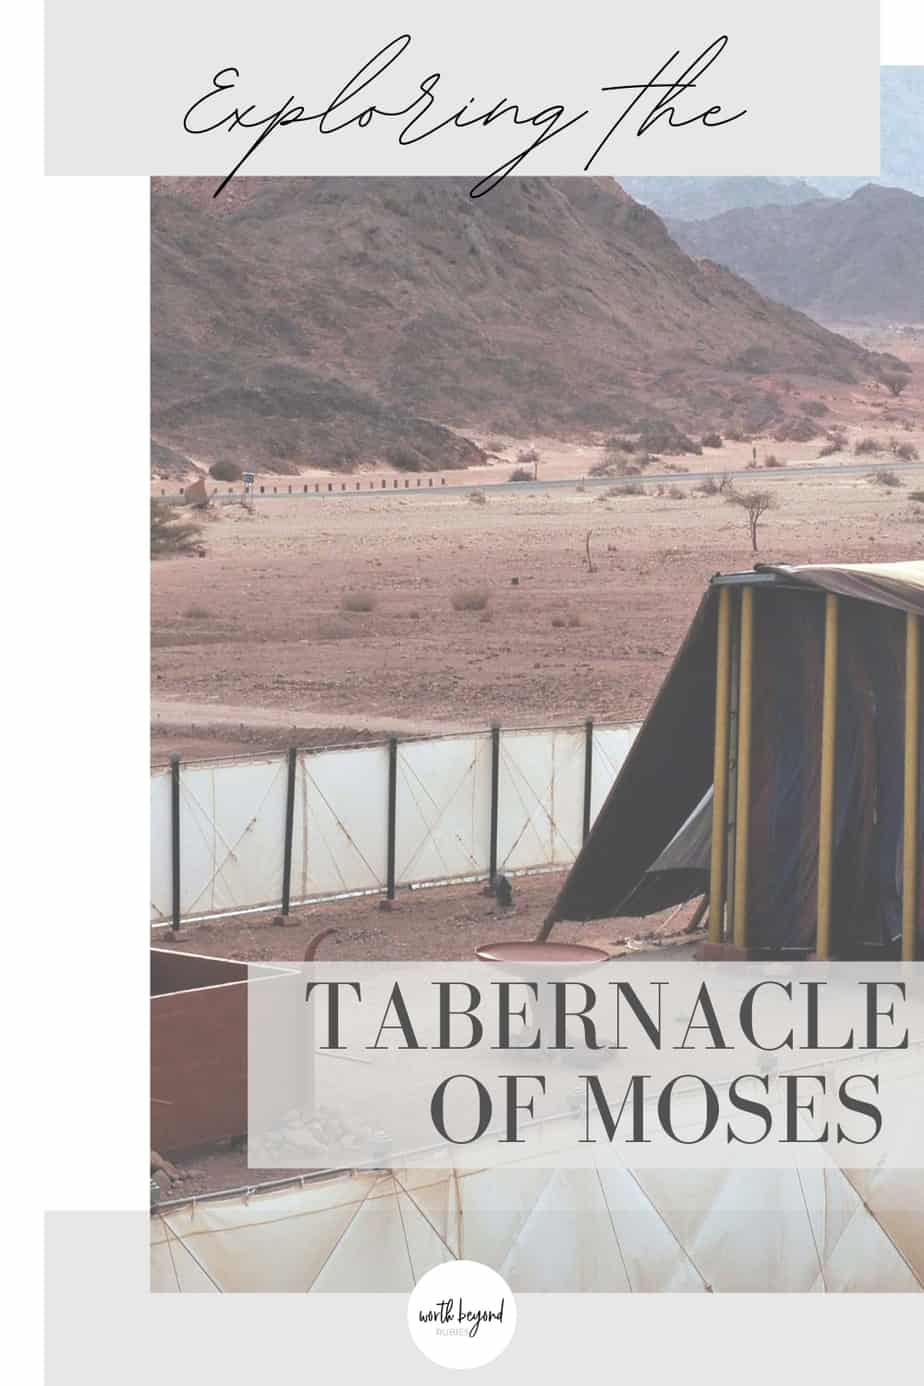 an image of the tabernacle of Moses and text that says Exploring the Tabernacle of Moses